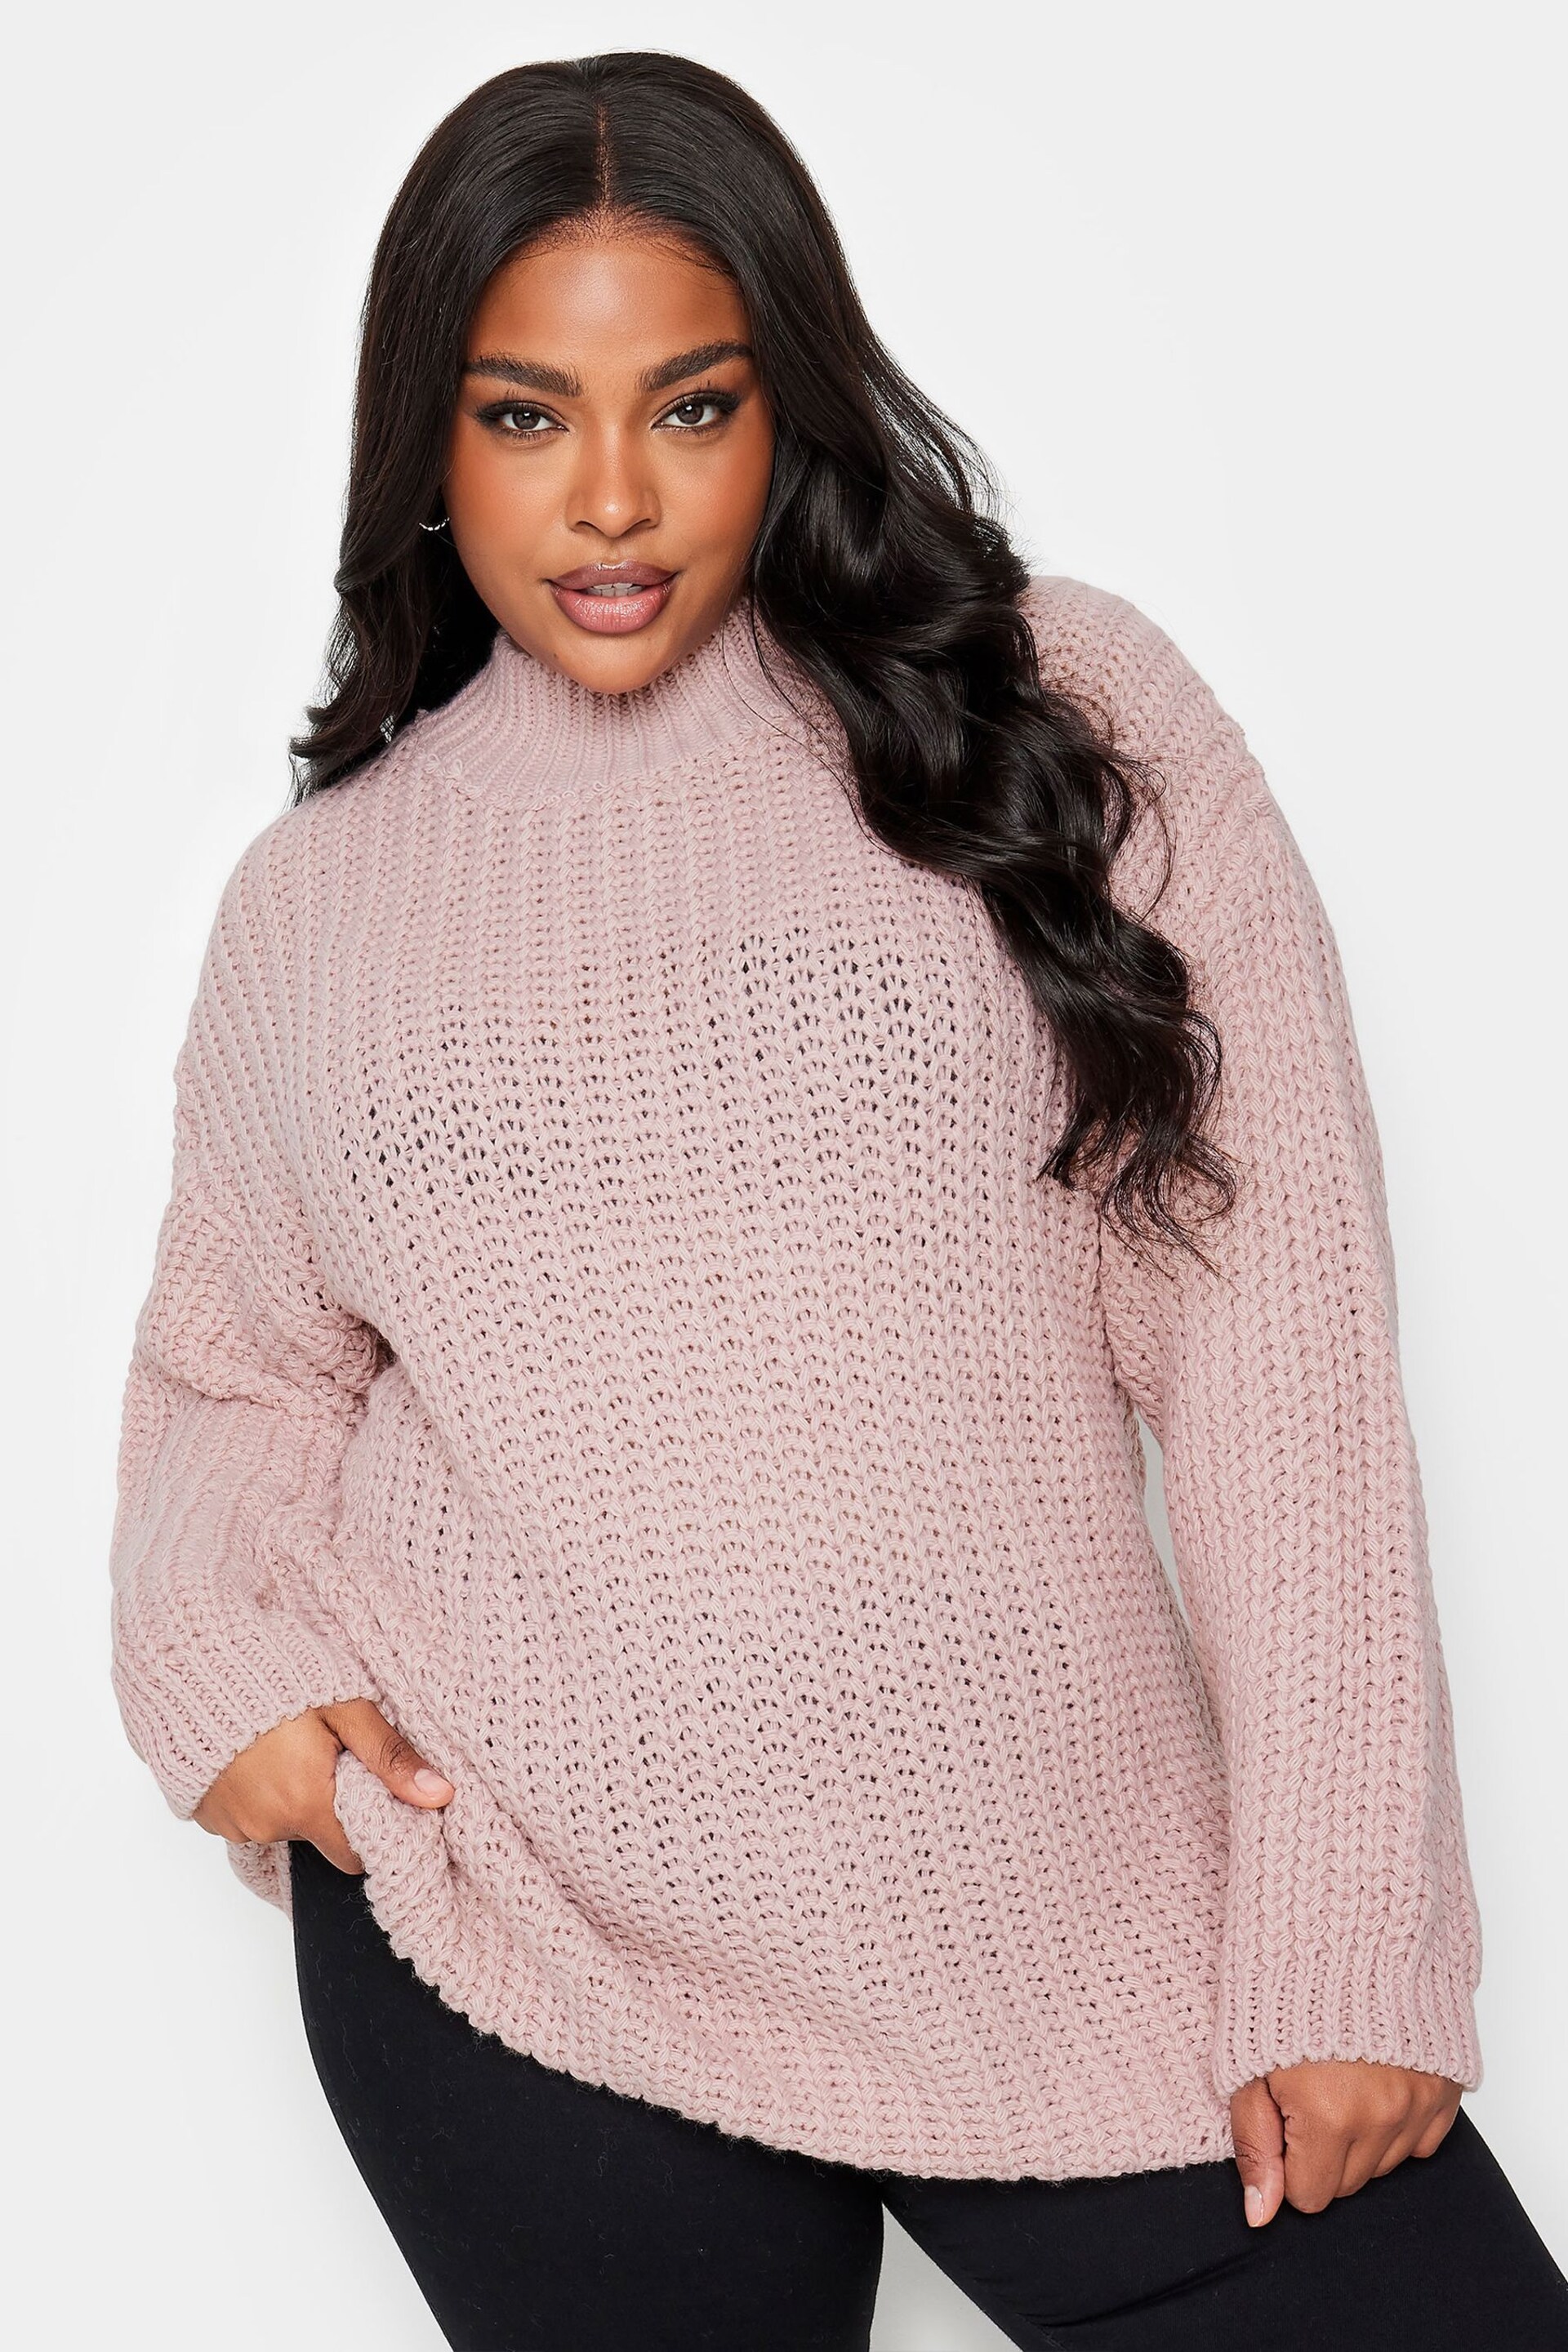 Yours Curve Pink High Neck Knitwear Jumper - Image 1 of 4